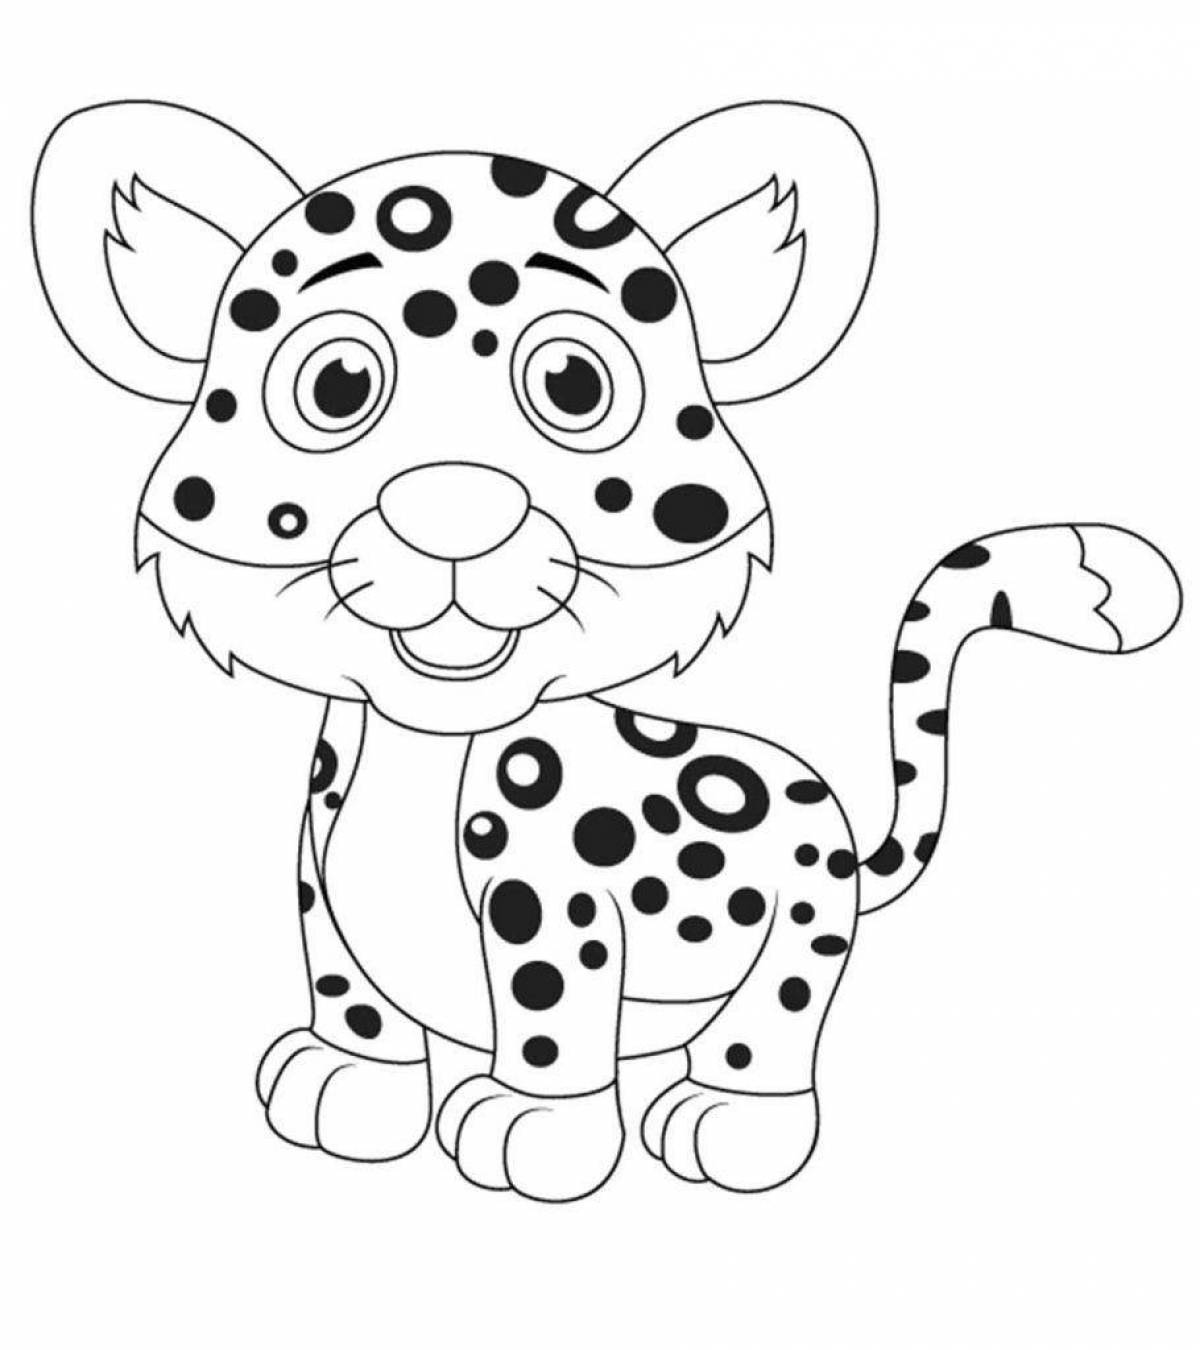 Live leopard coloring book for kids